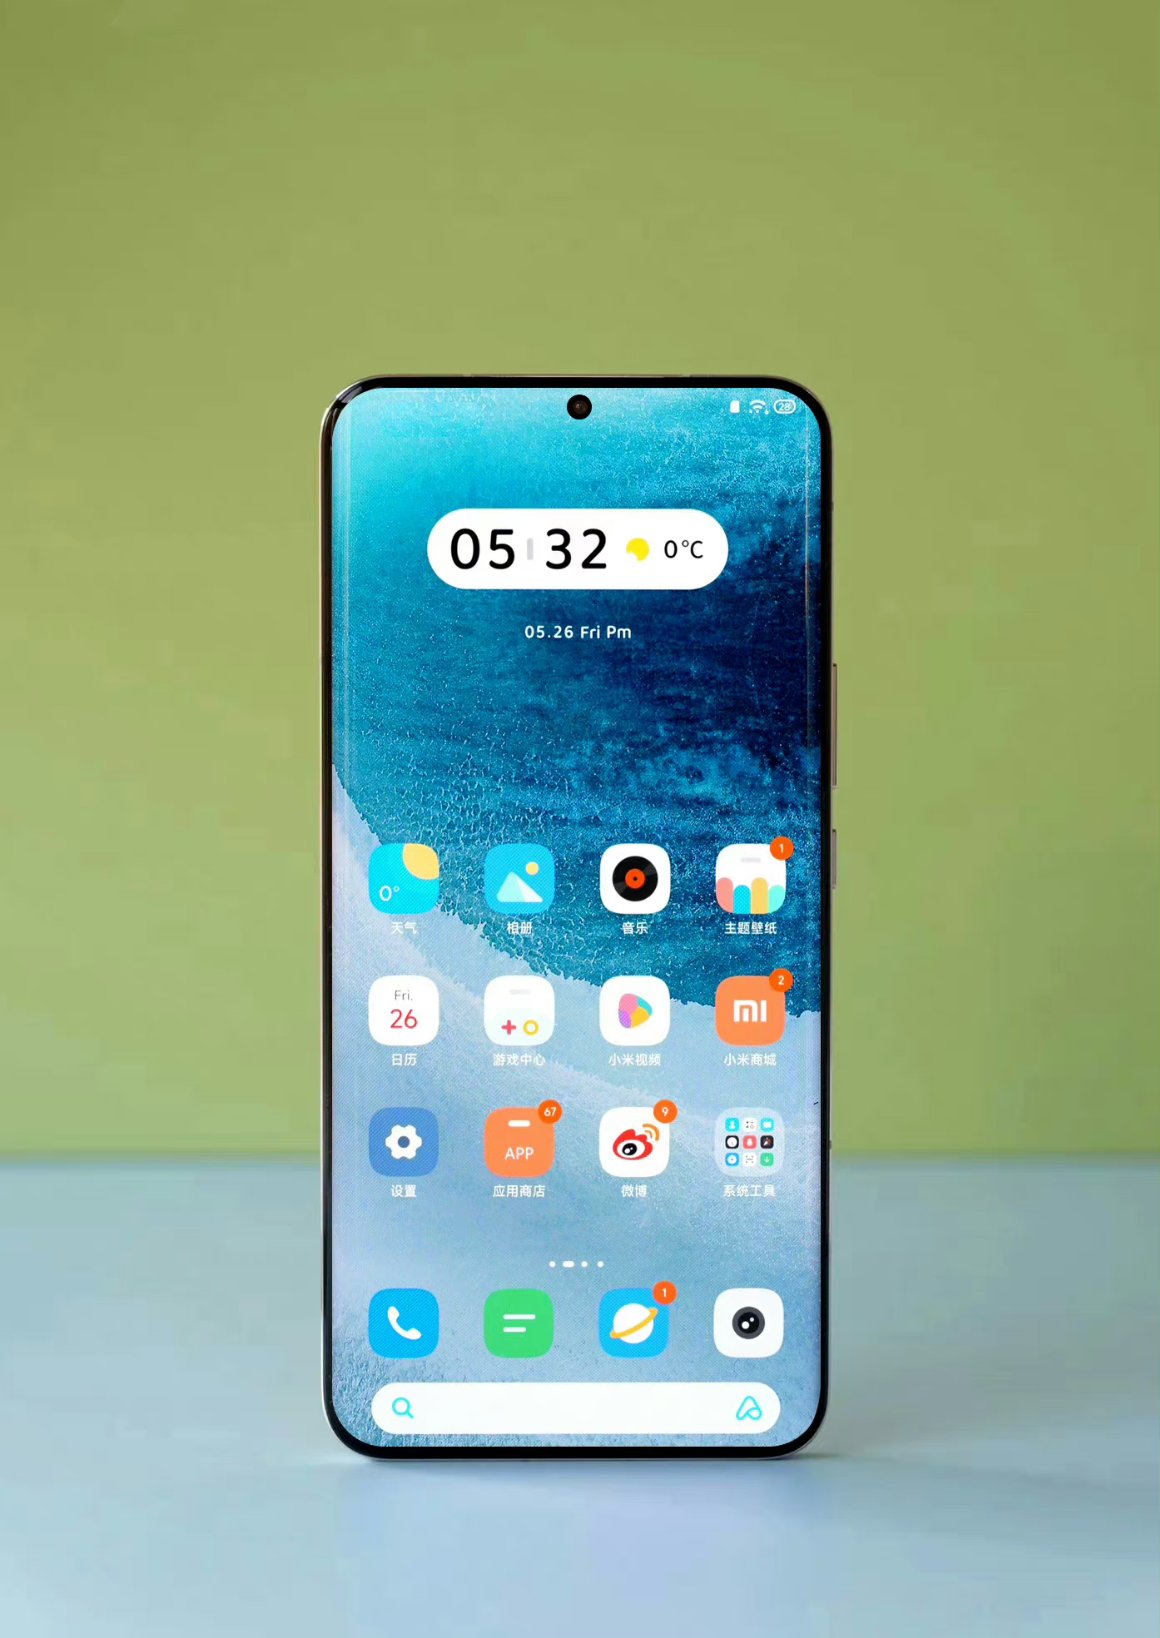 ICE UNIVERSE on X: Before the release of Xiaomi 14 series, it was  difficult for me to be interested in the design of Android phones.After the  release of Xiaomi 14 series, I